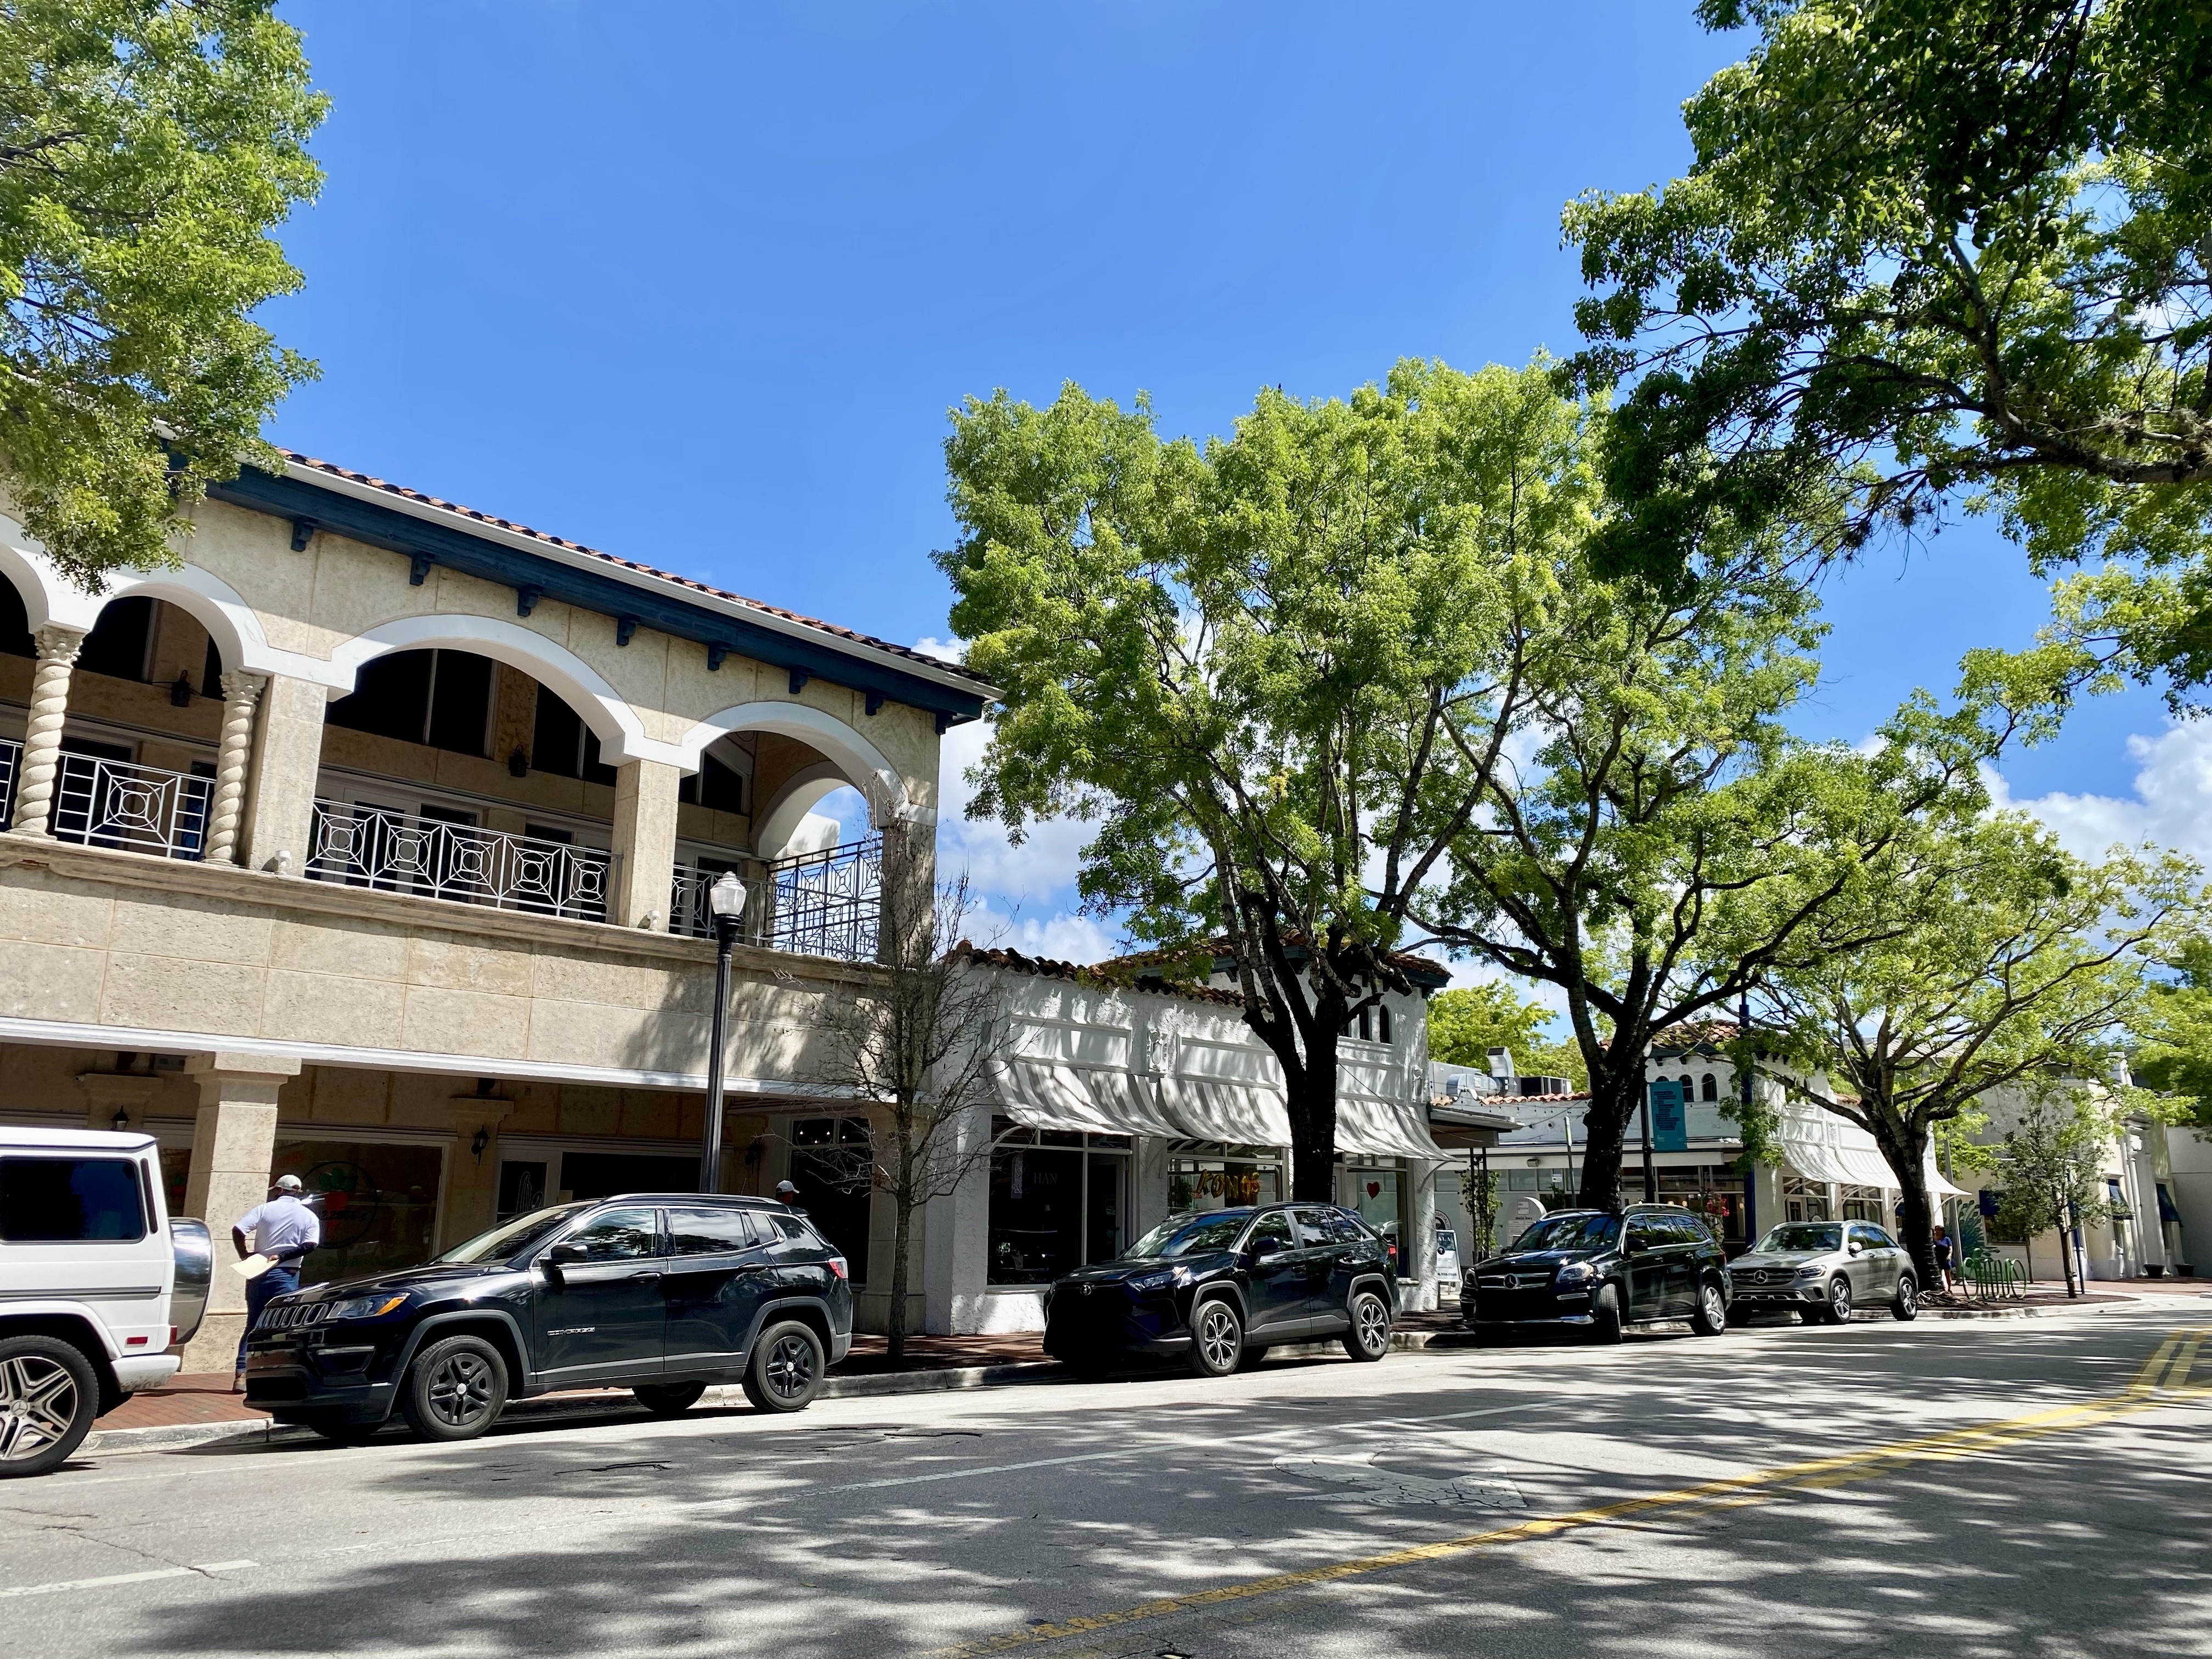 Main Highway Shopping in Coconut Grove